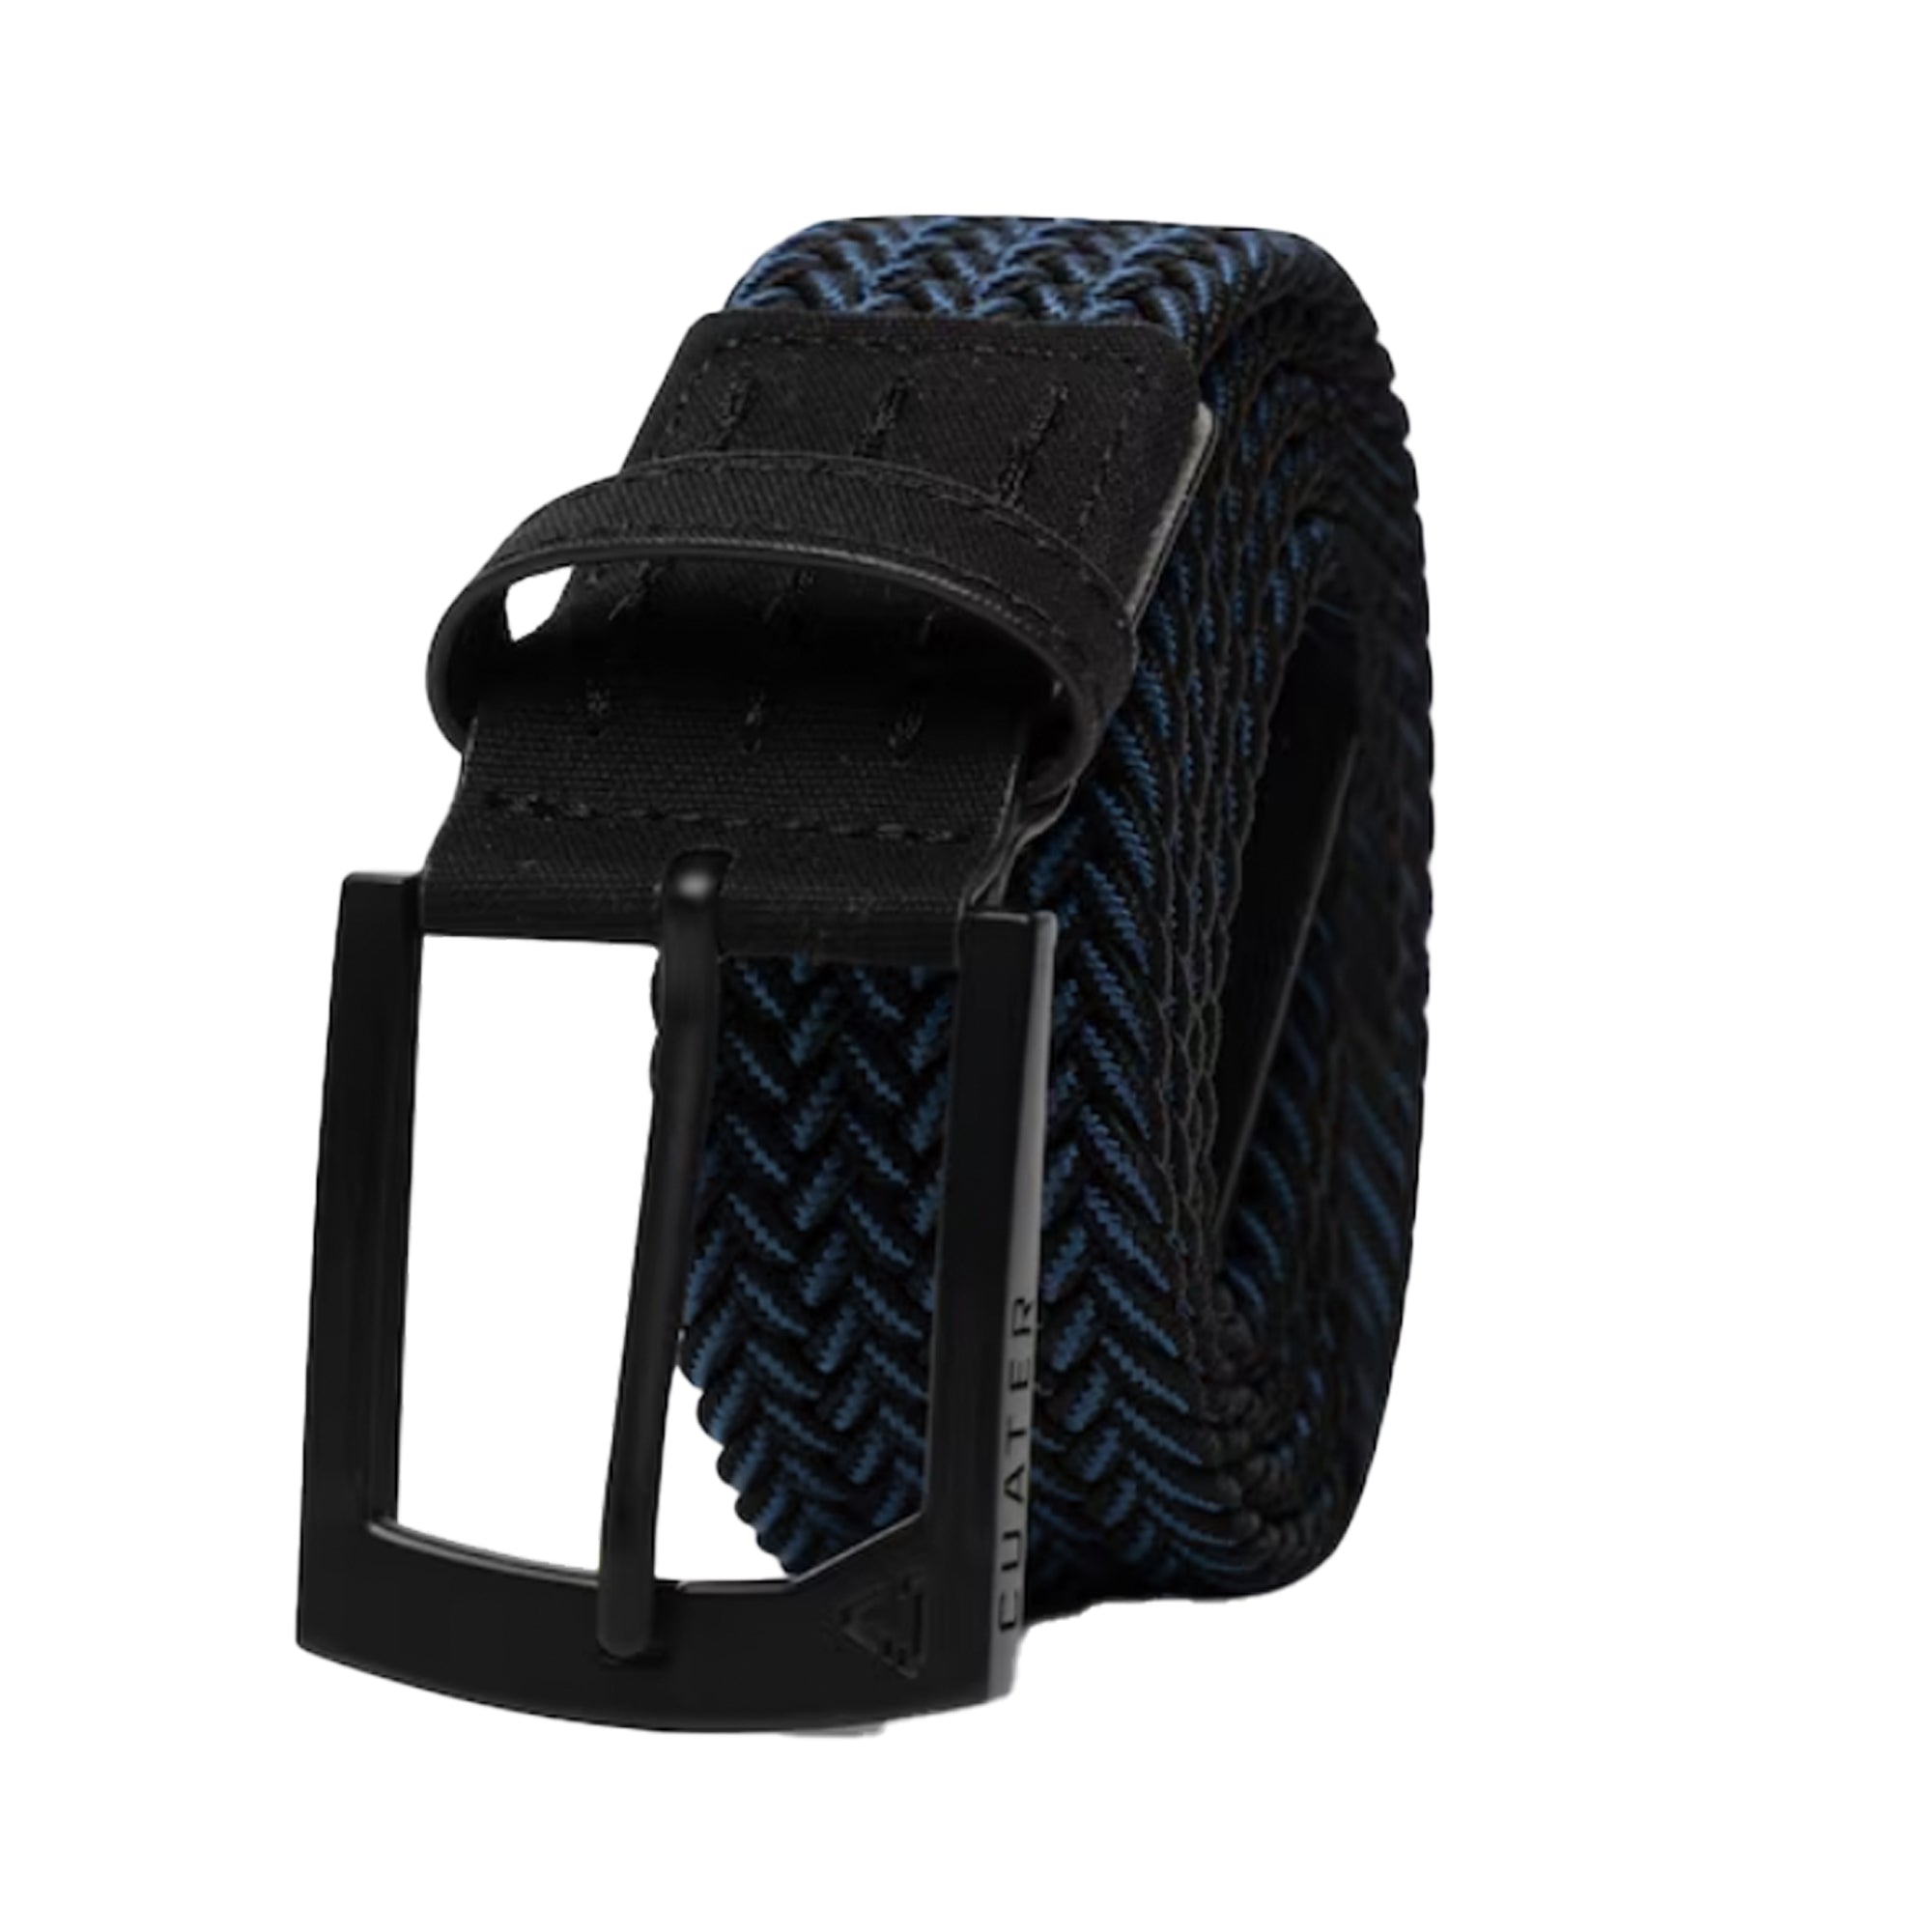 Cuater Cage Diving Belt